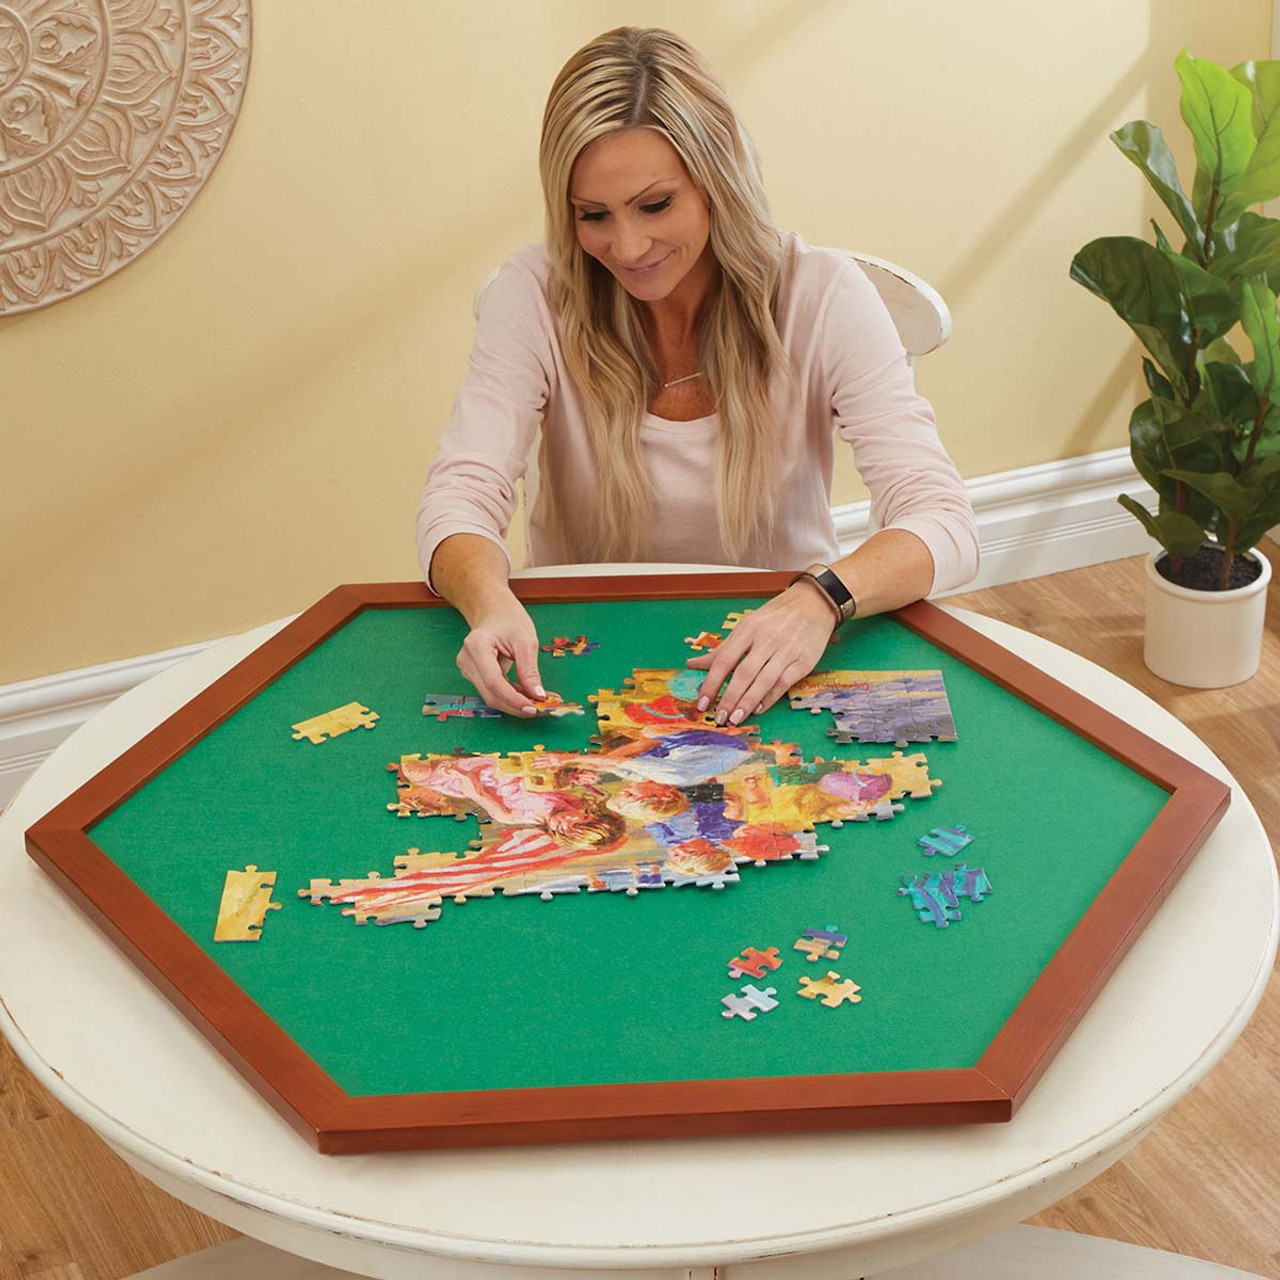  Puzzle Board, Wooden Puzzle Board,Puzzle Tables for